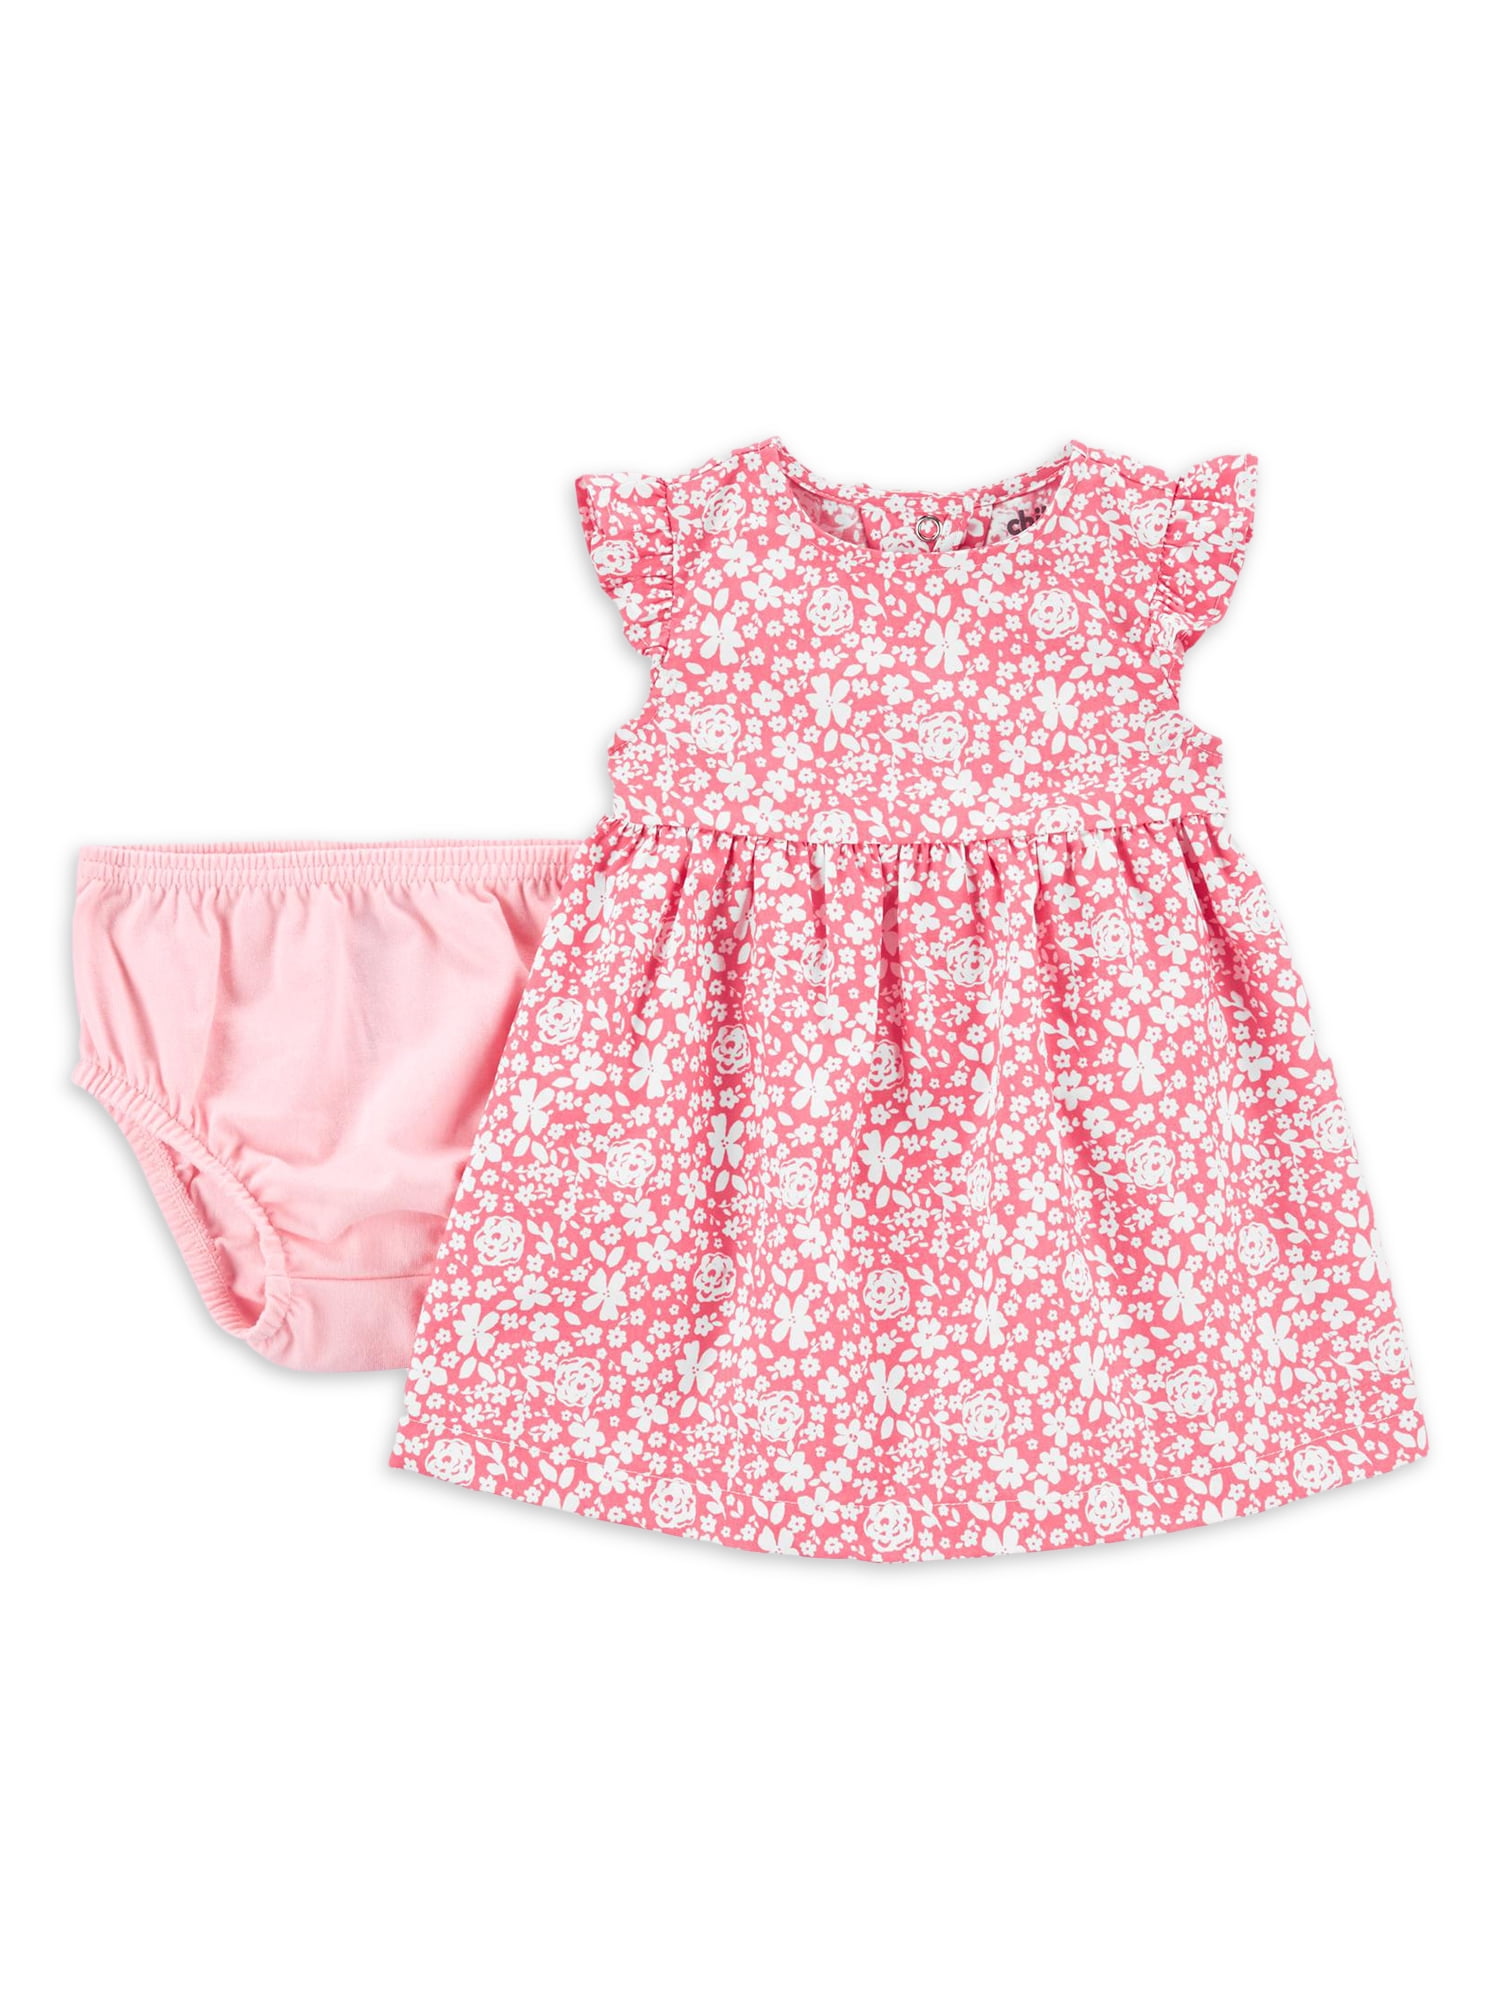 NEW CARTERS BABY GIRLS PINK & WHITE FLORAL DESIGN ONE-PIECE ROMPER SZ 3M 6M 12M 